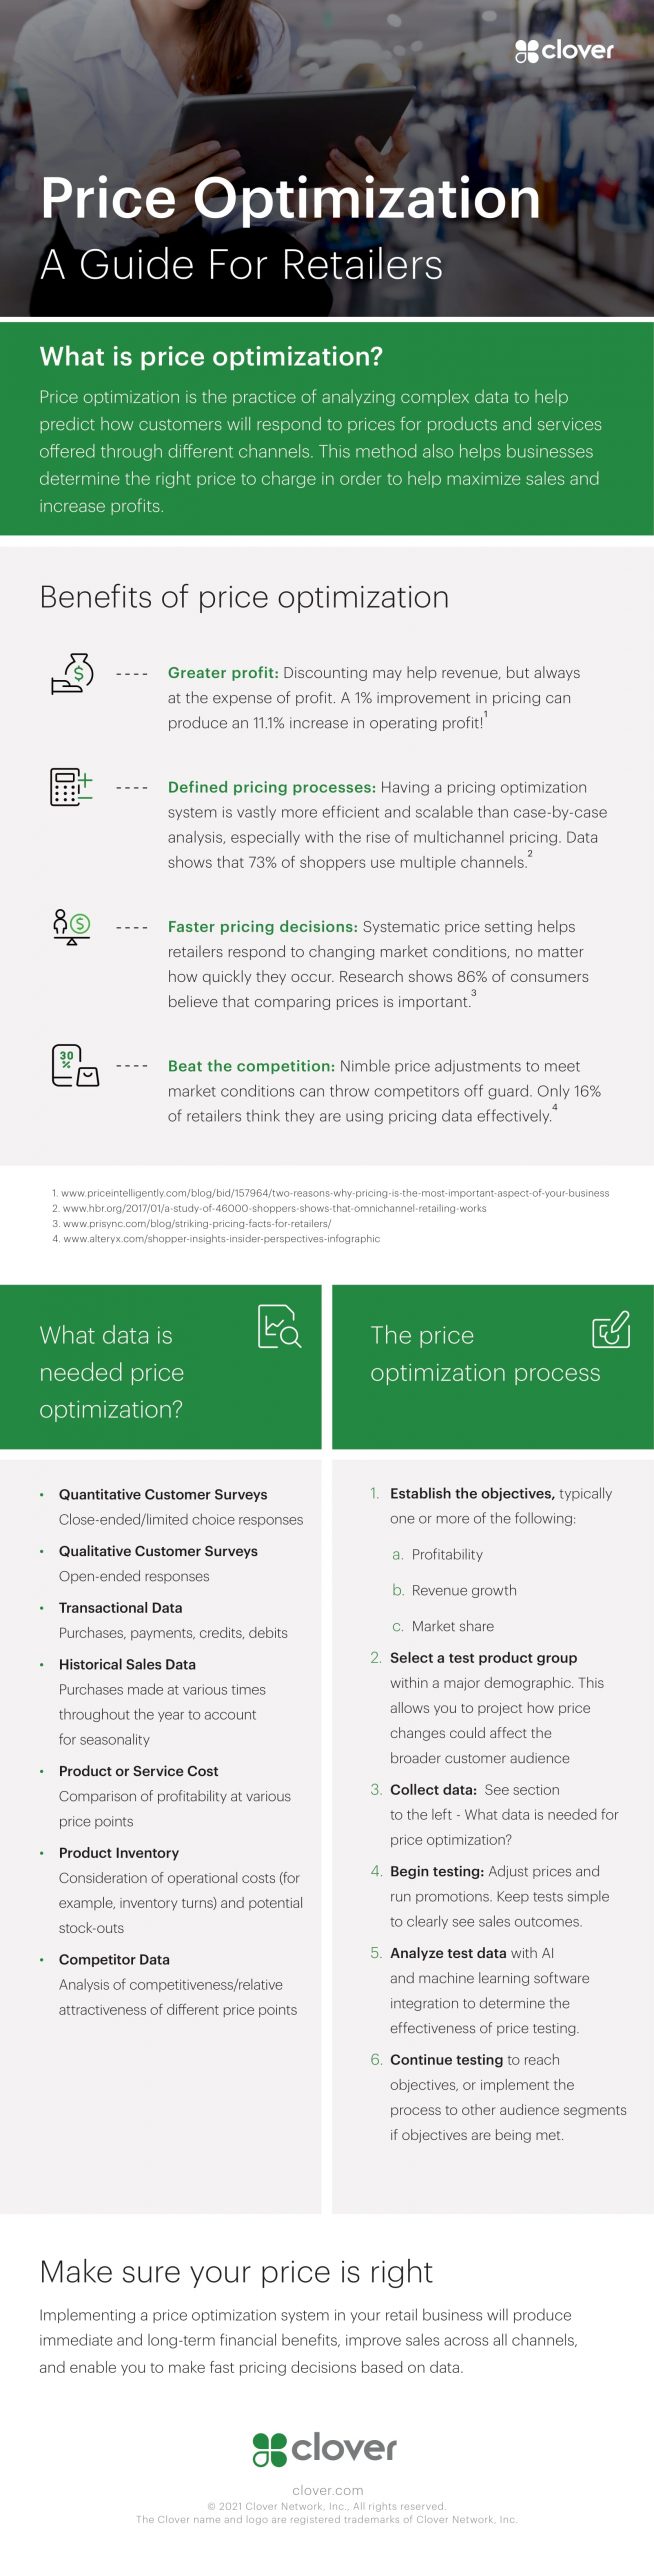 Price Optimization A Guide For Retailers 1